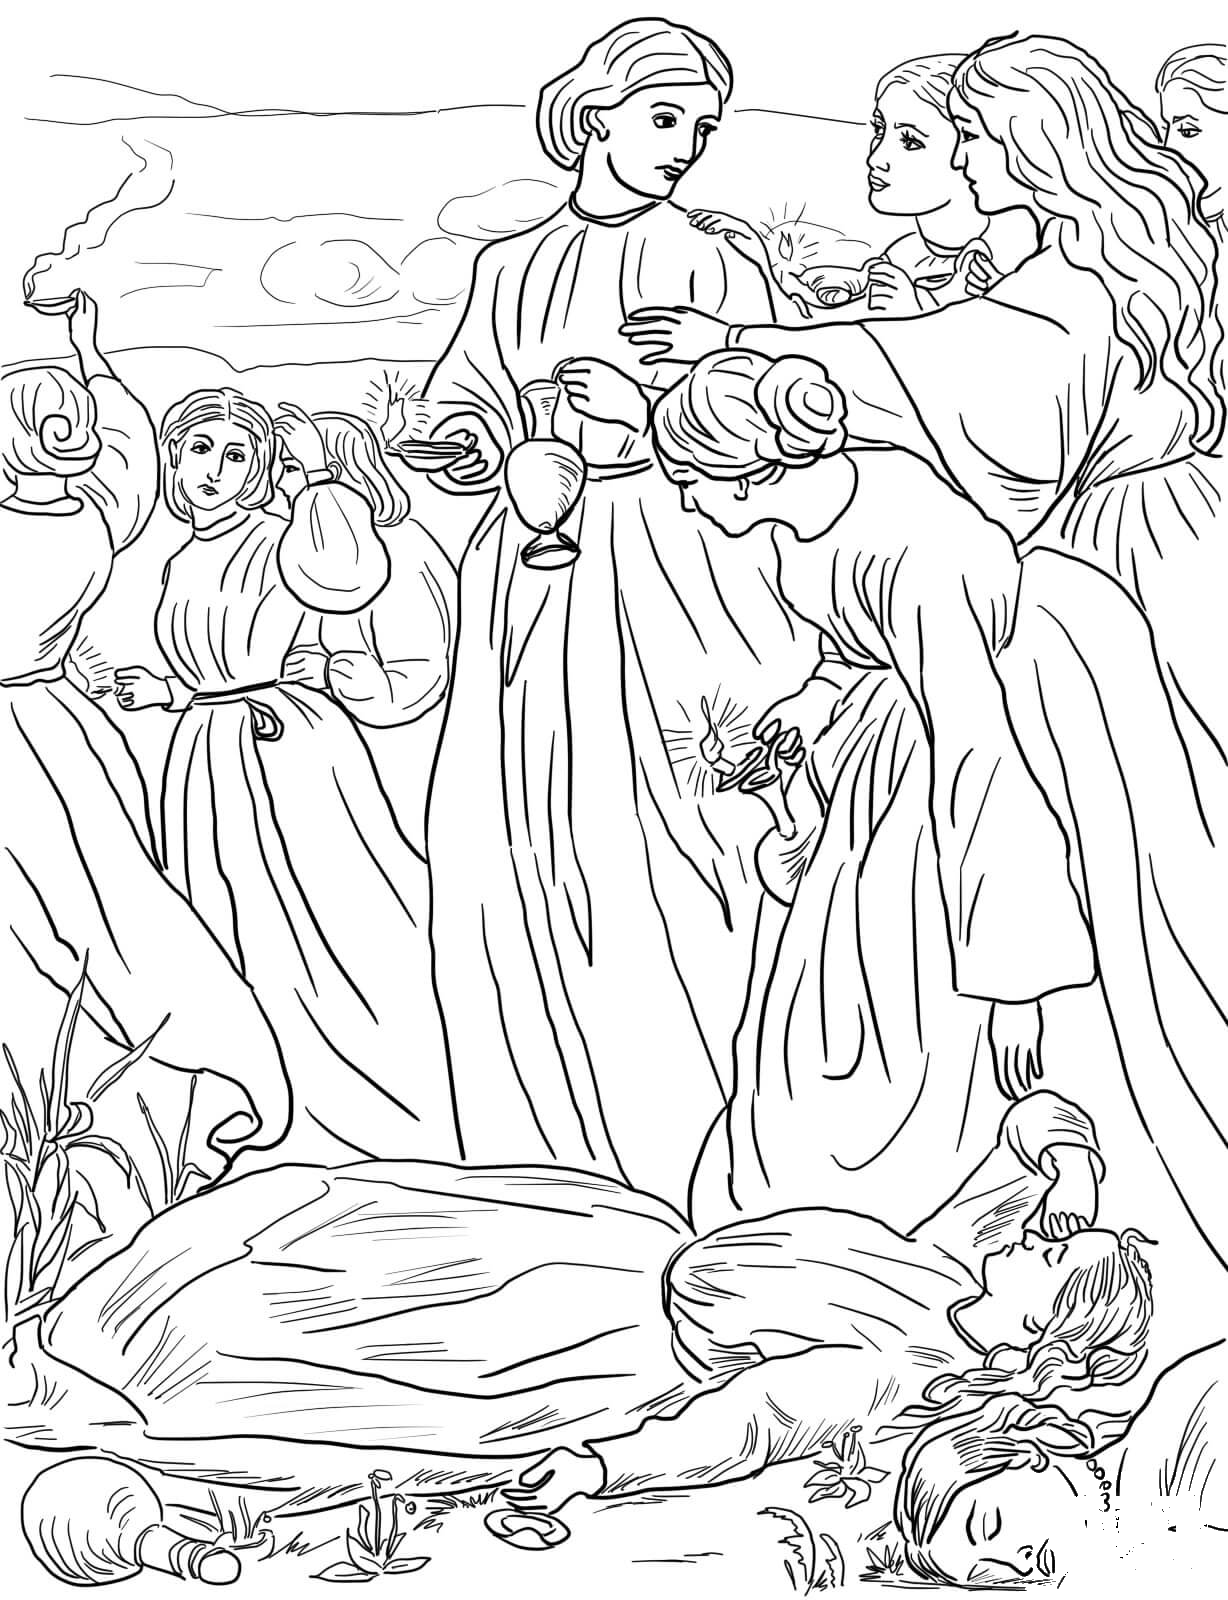 Ten Virgins Parable coloring page - ColouringPages